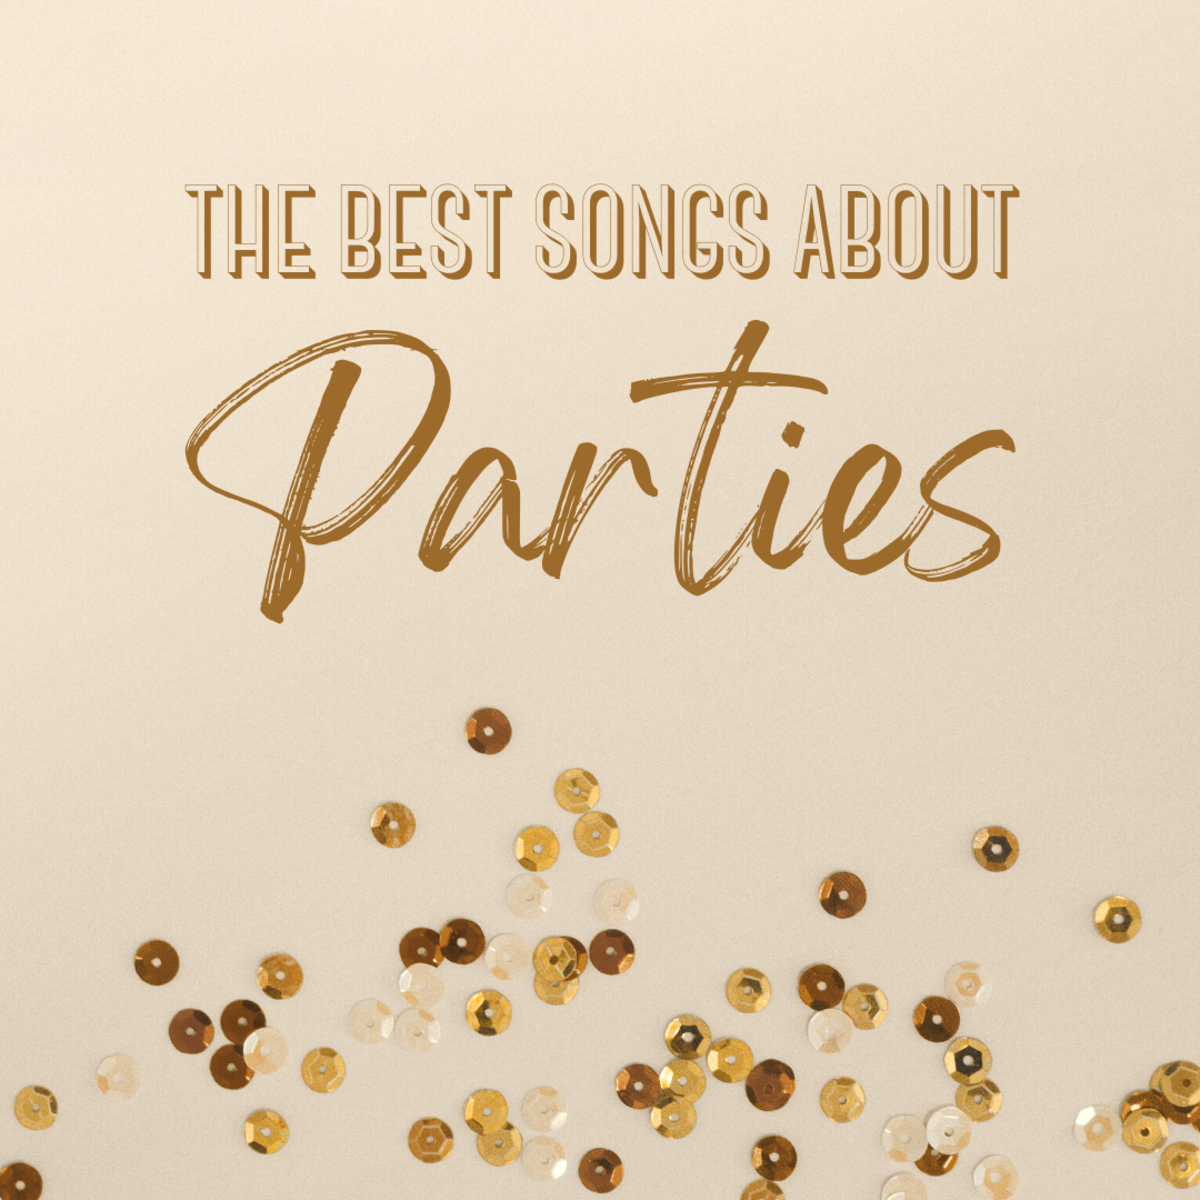 100 Best Songs About Parties - Spinditty